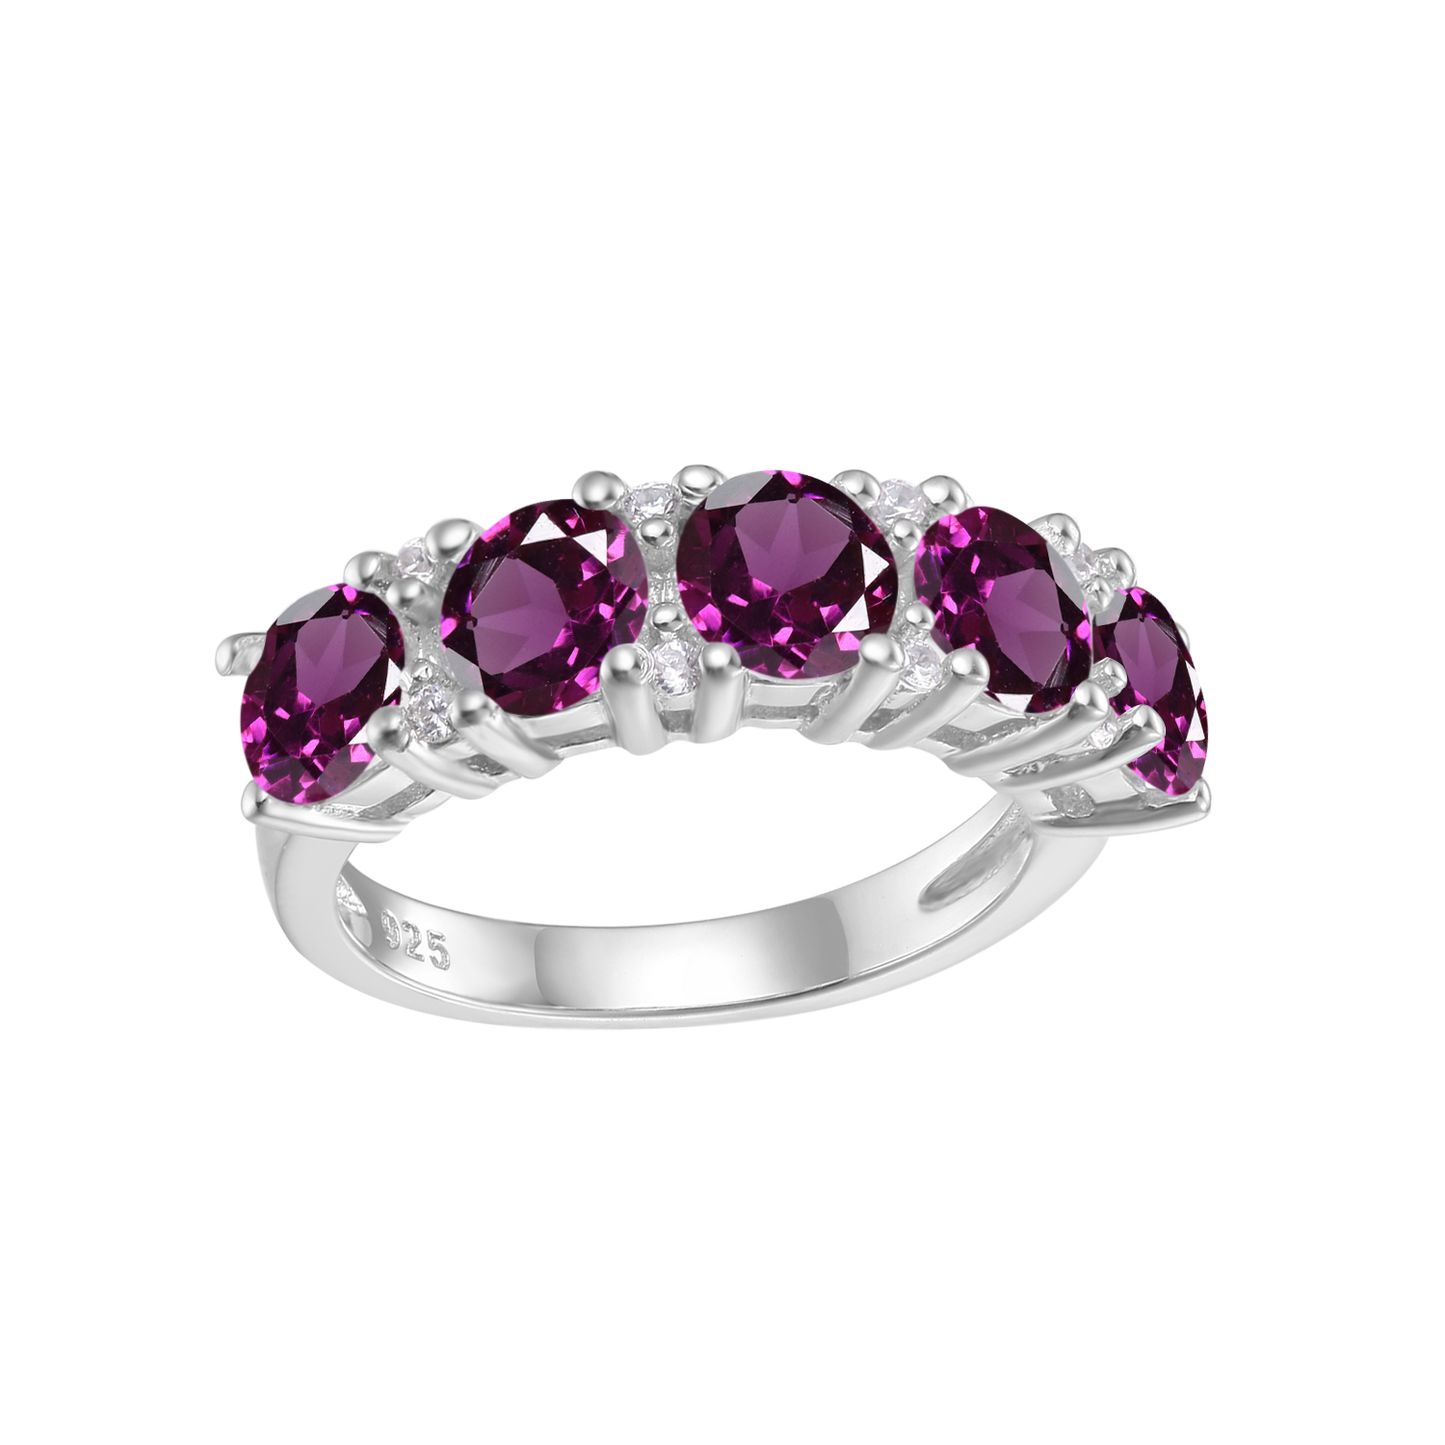 A silver ring set with five burgundy gems.